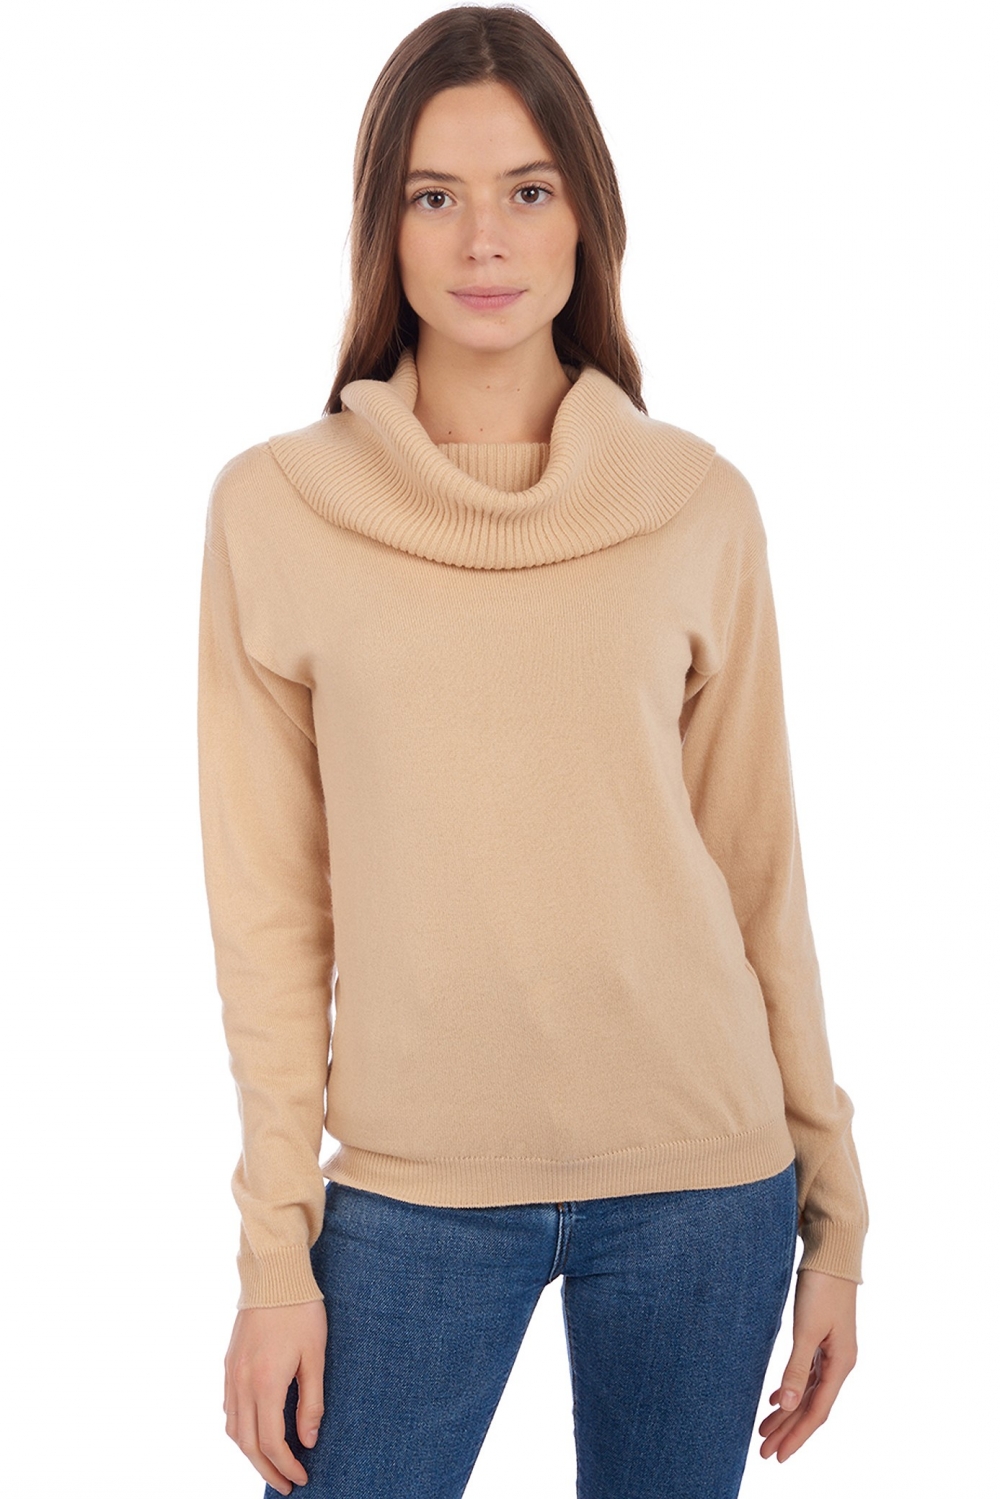 Cashmere ladies our full range of women s sweaters anapolis honey xs